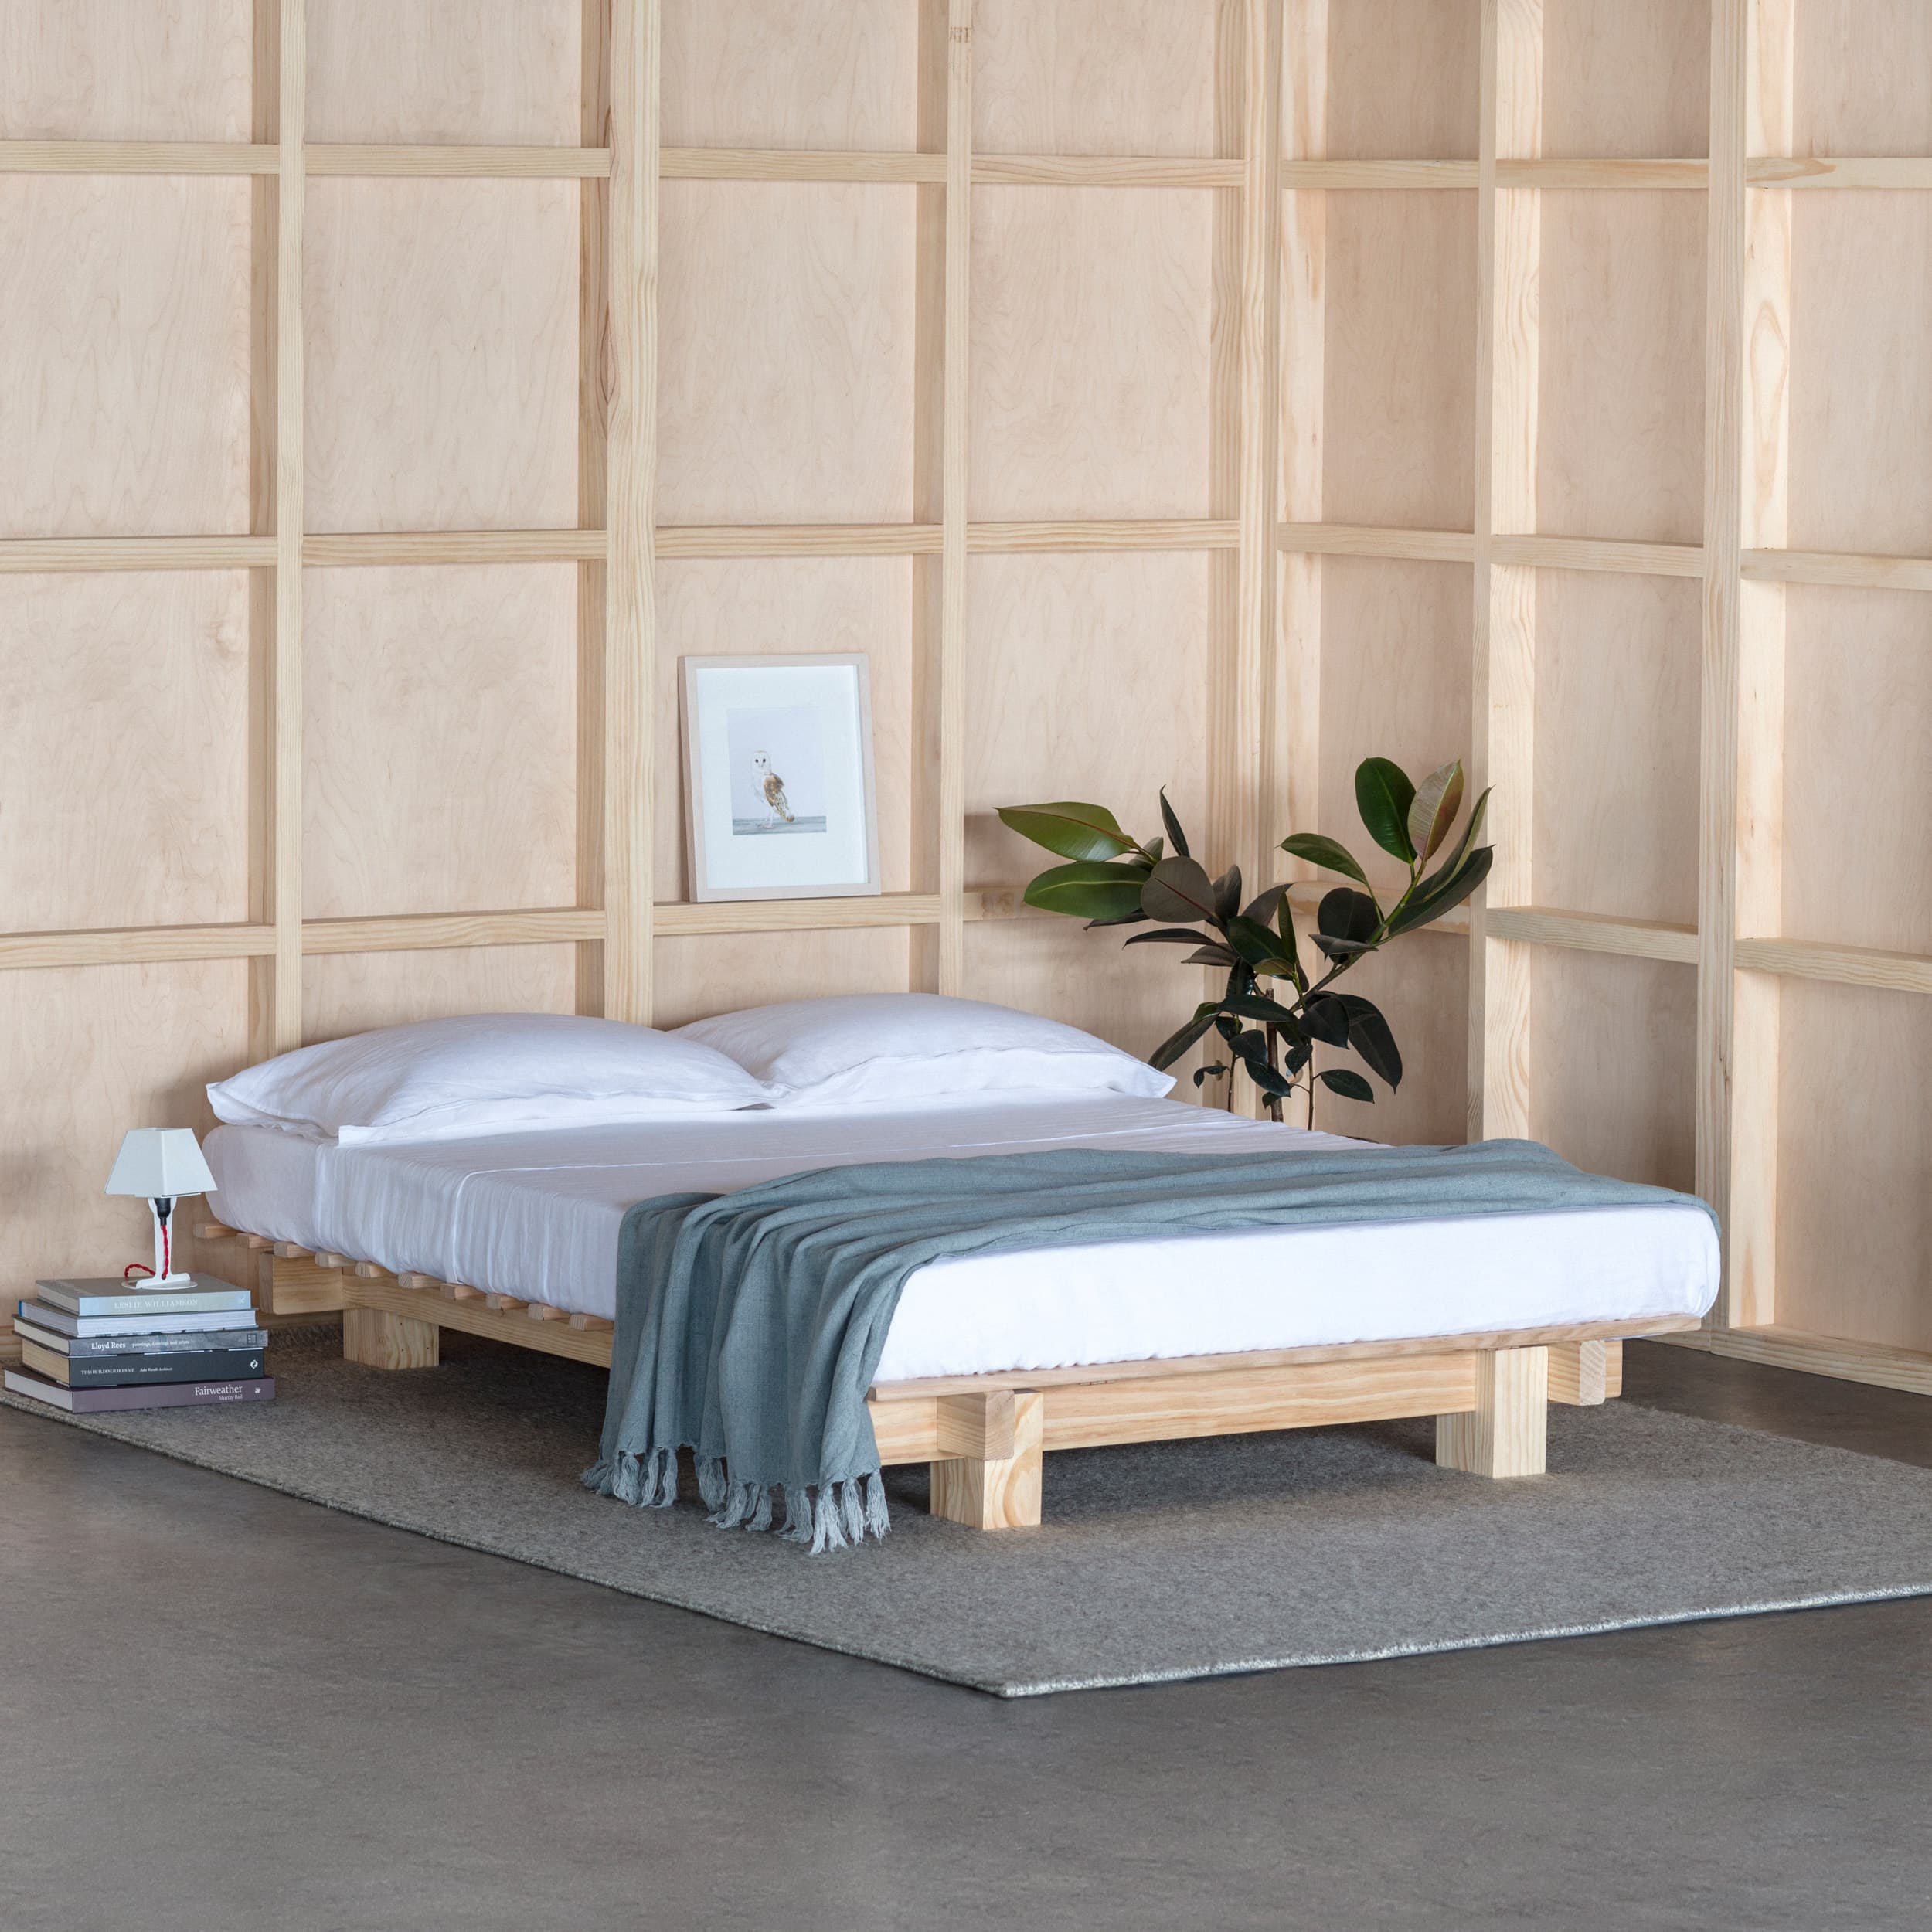 Lo-line Timber Bed Frame